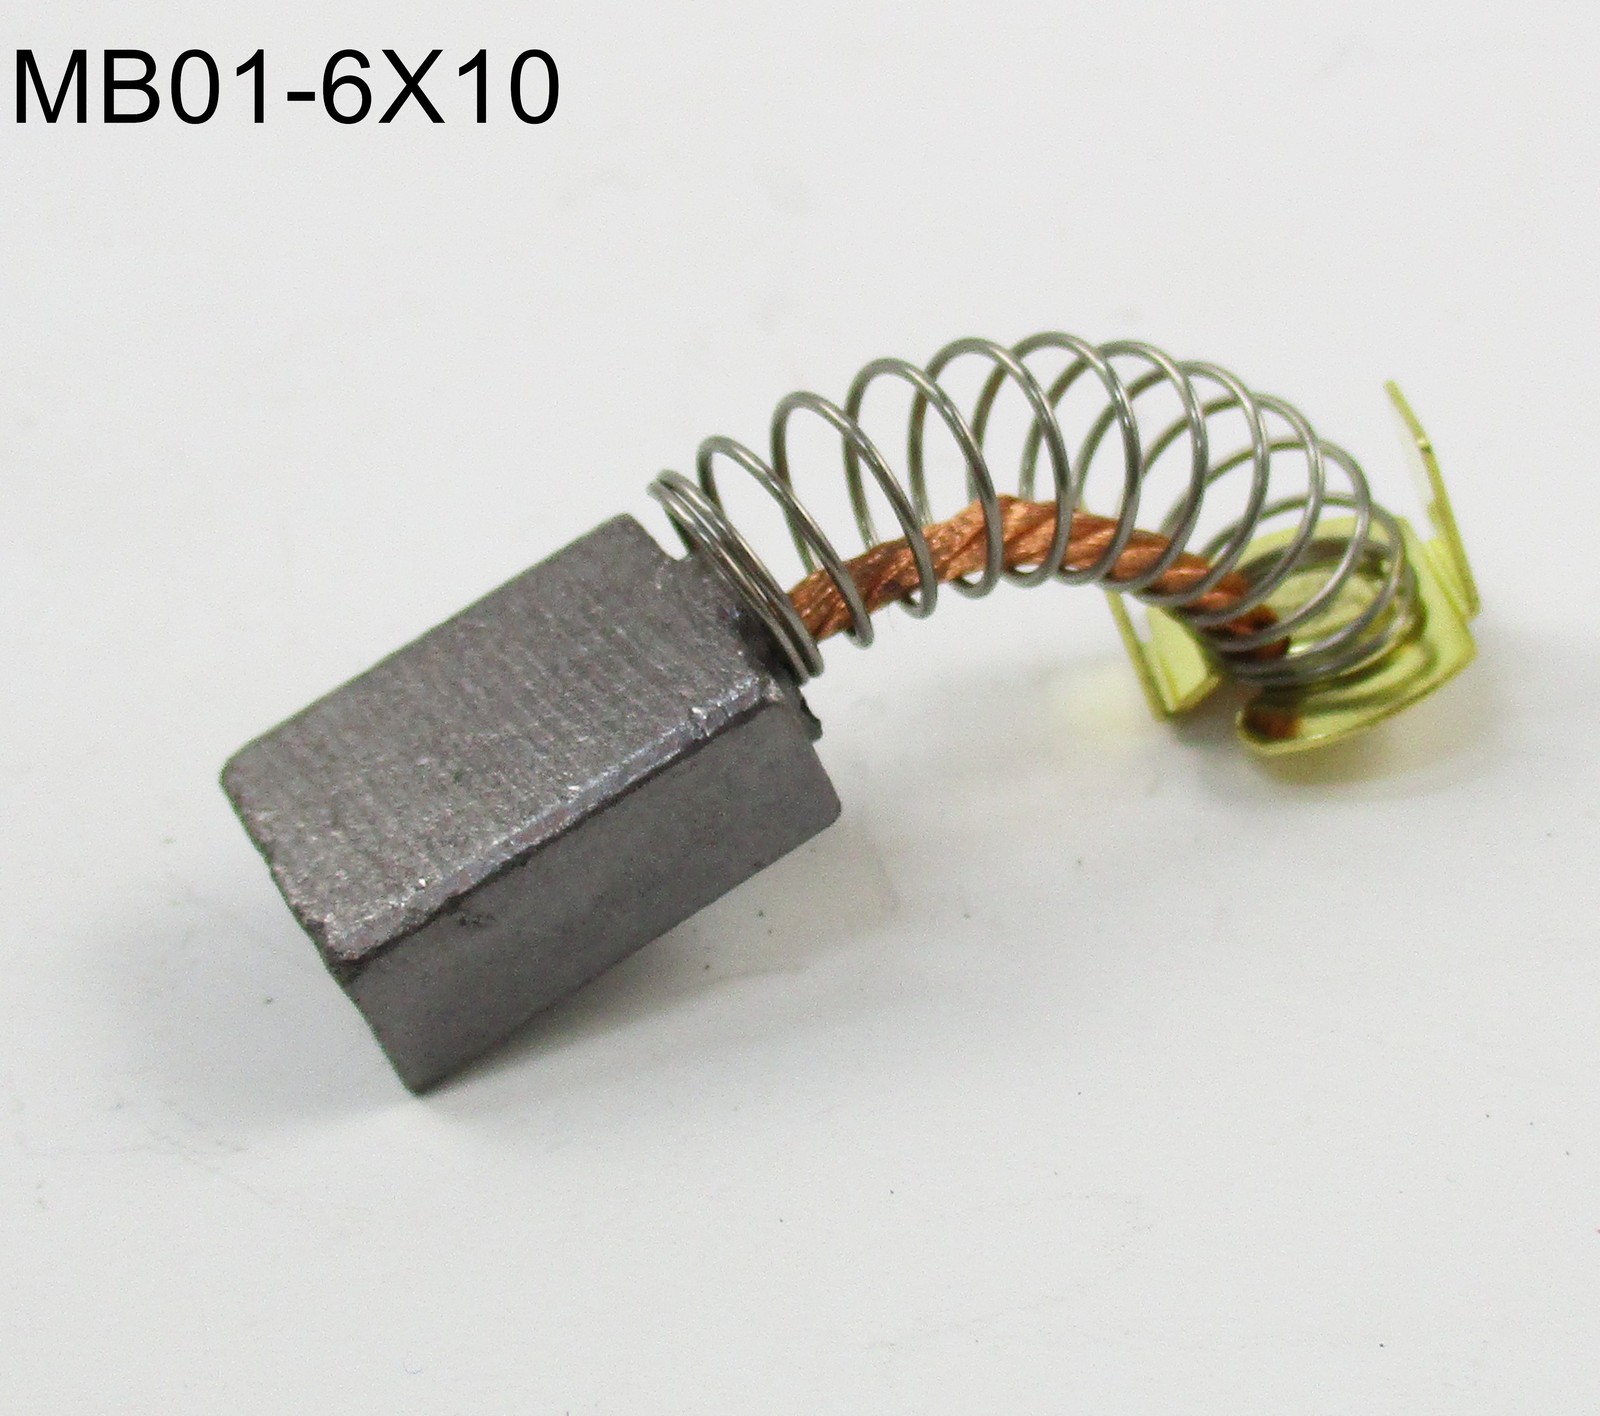 MSP X10pcs, Carbon Brush 6X10mm 2-pole motor Mobility Scooter Parts power chair